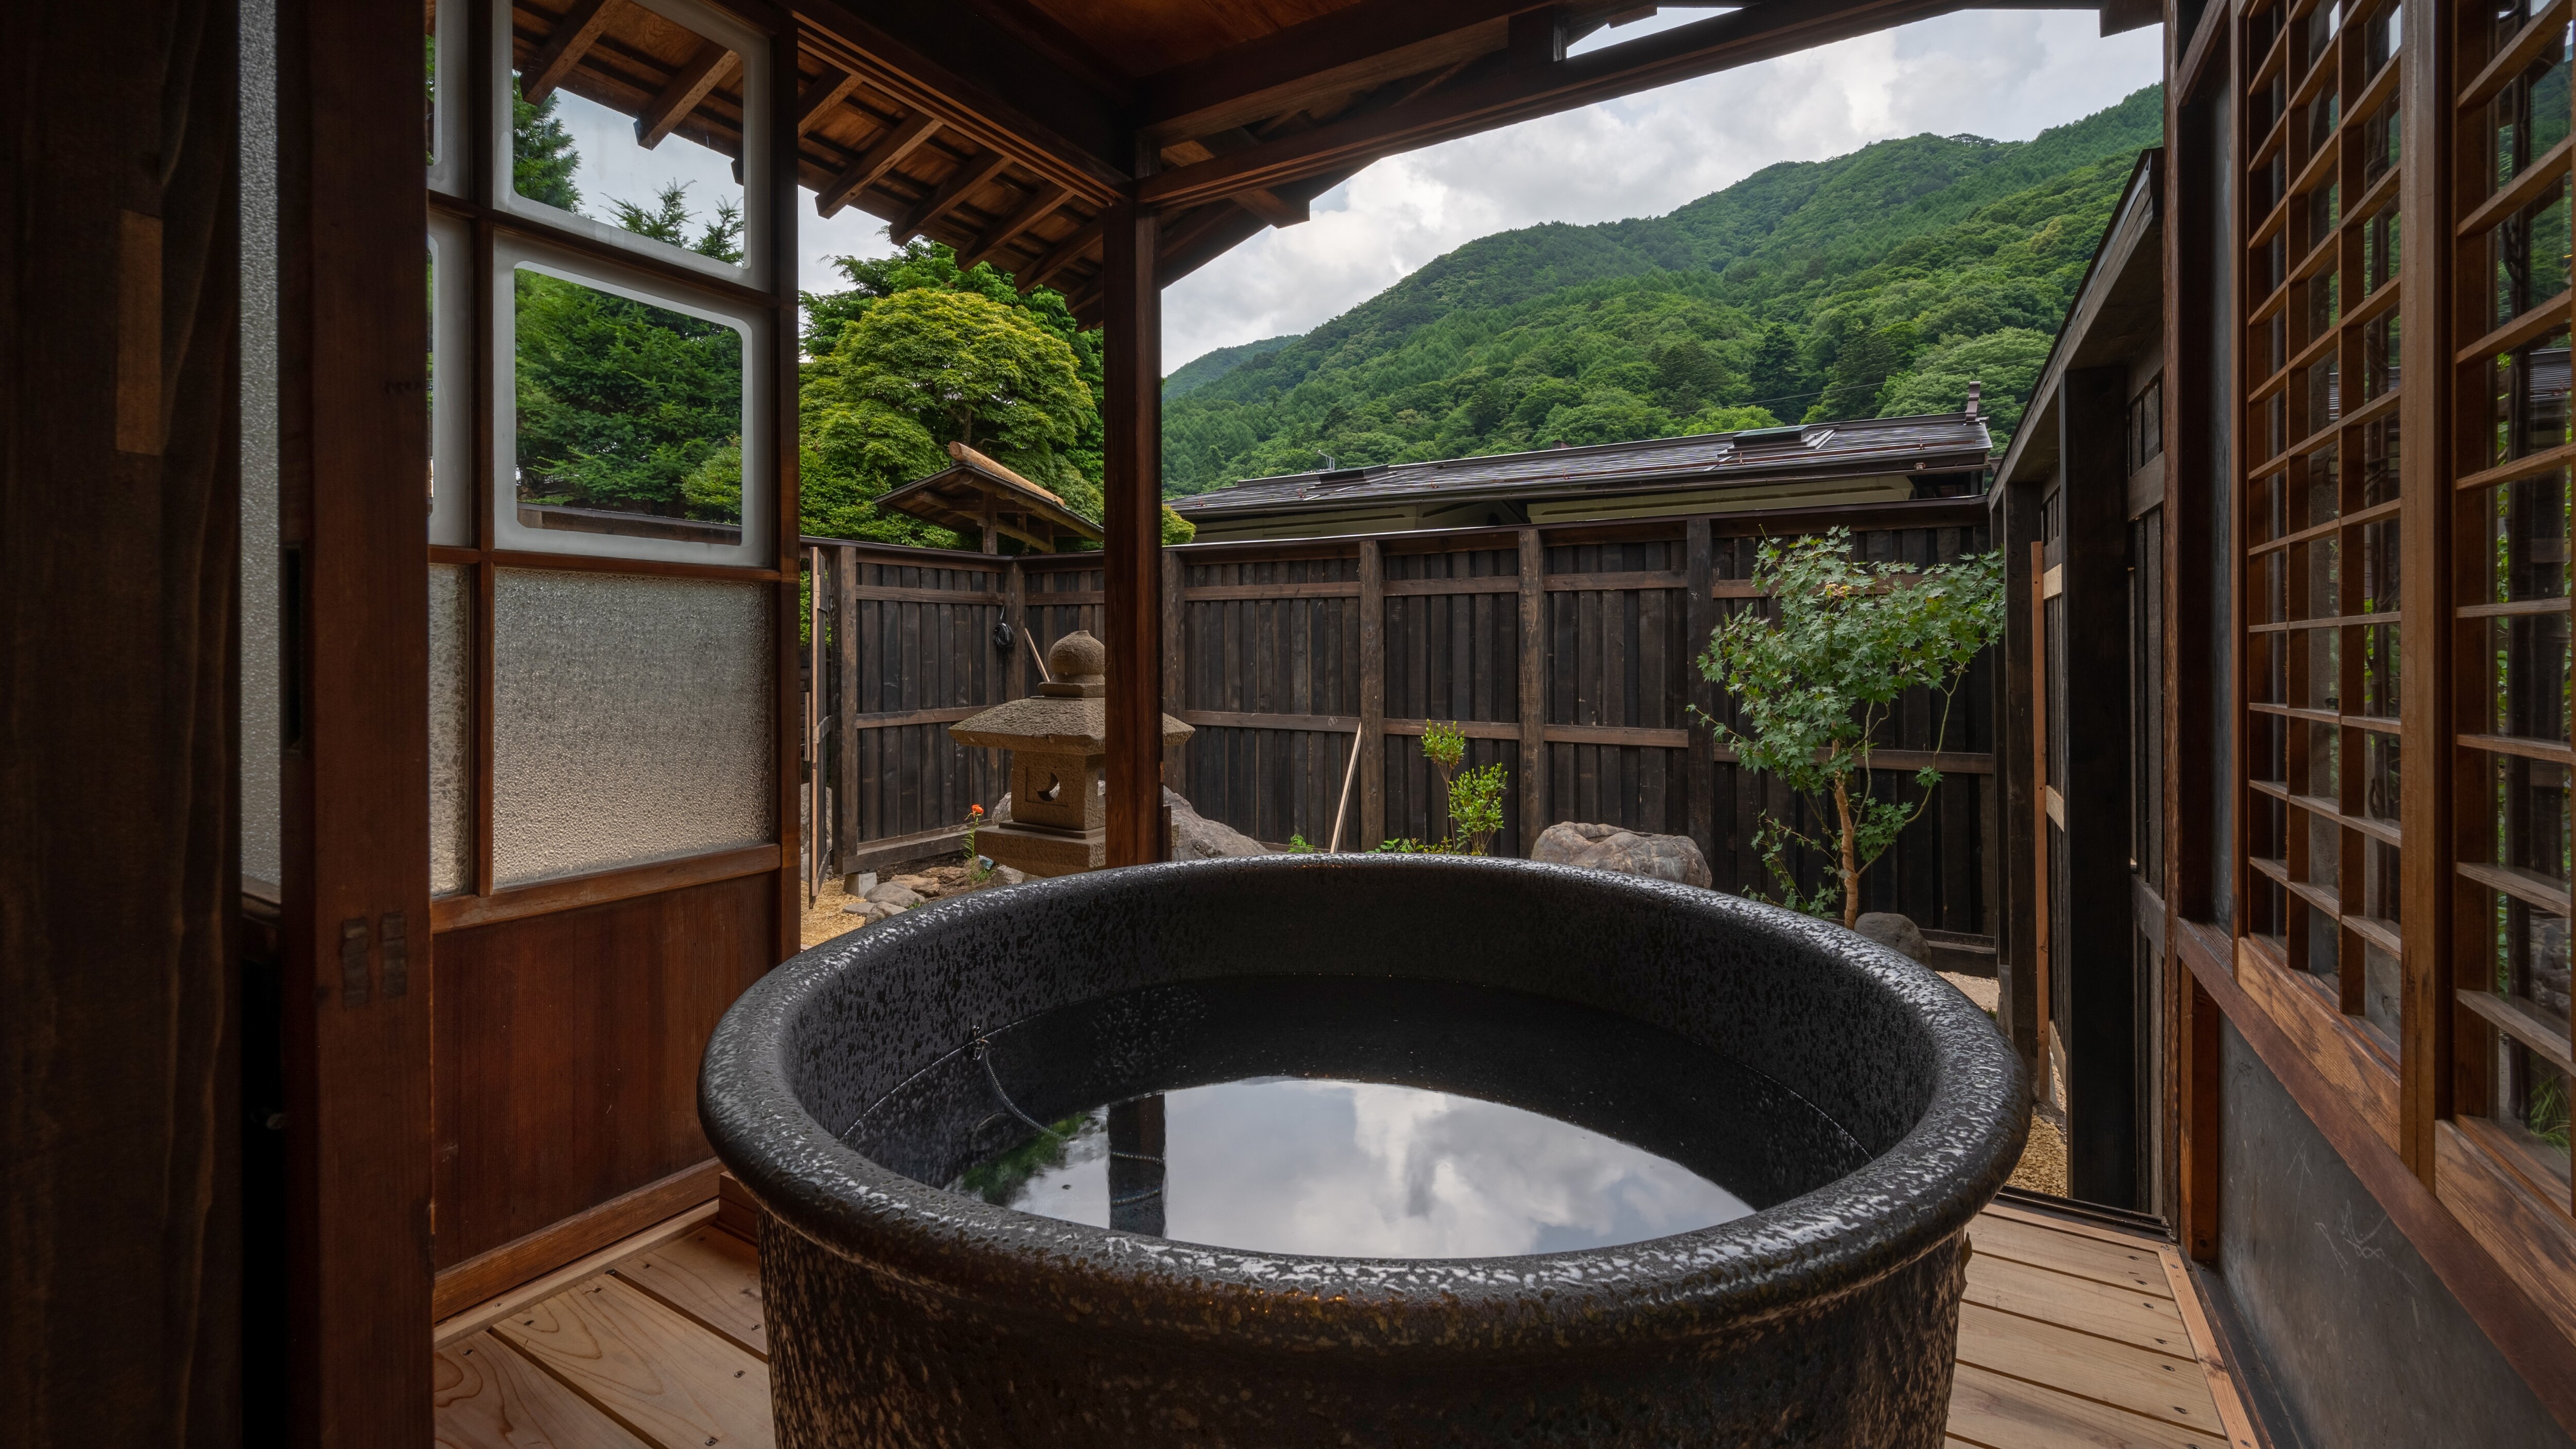 [Toshiyoshiya] Hyakushi / Feel the vague boundary between the inside and the outside / With a semi-open-air bath